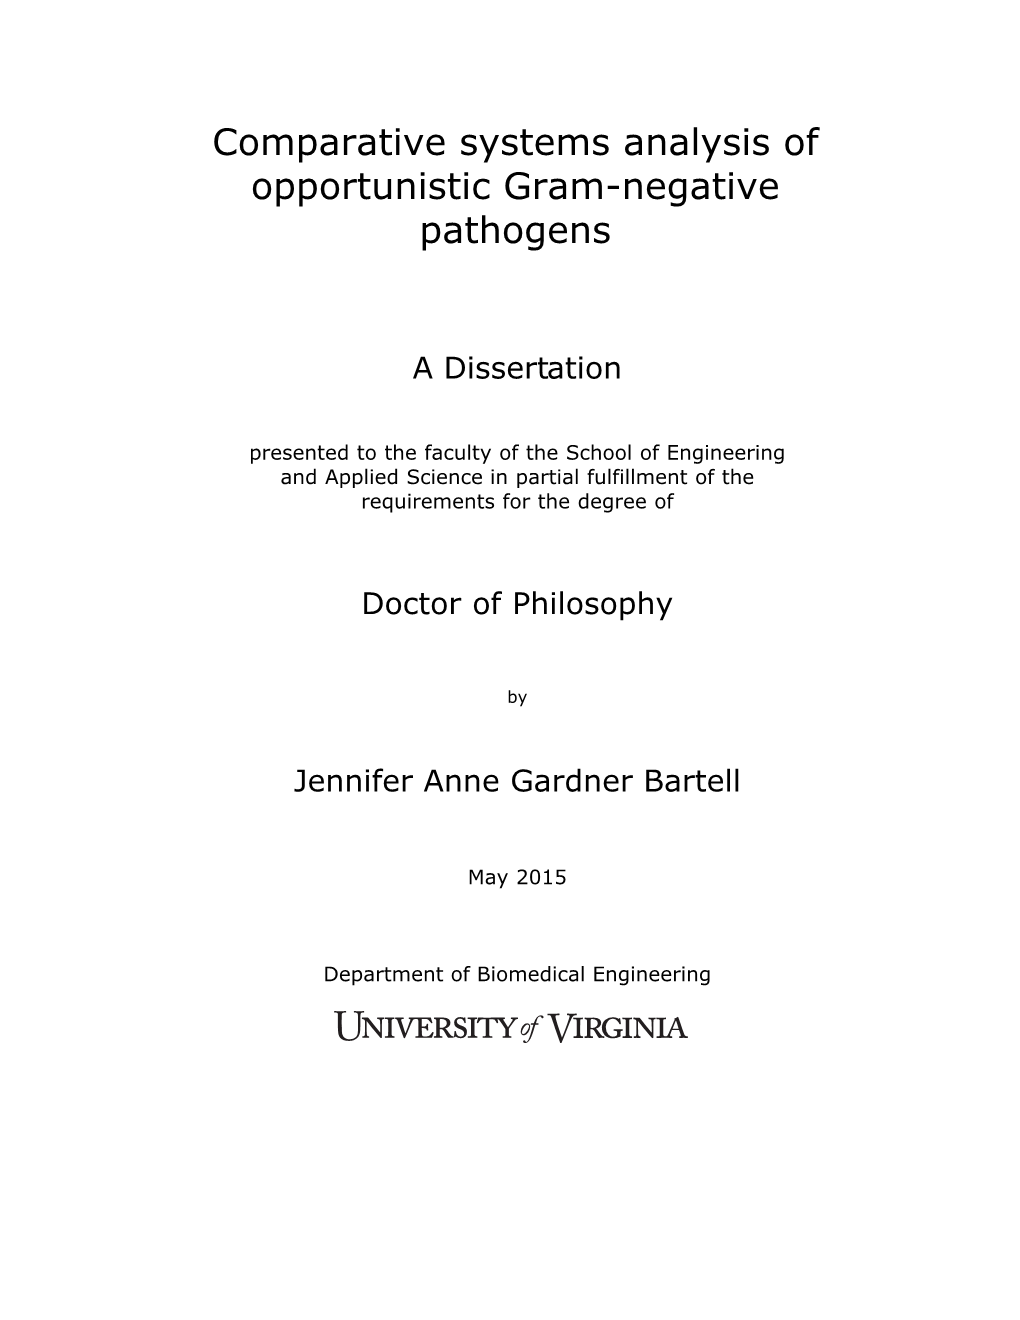 Comparative Systems Analysis of Opportunistic Gram-Negative Pathogens